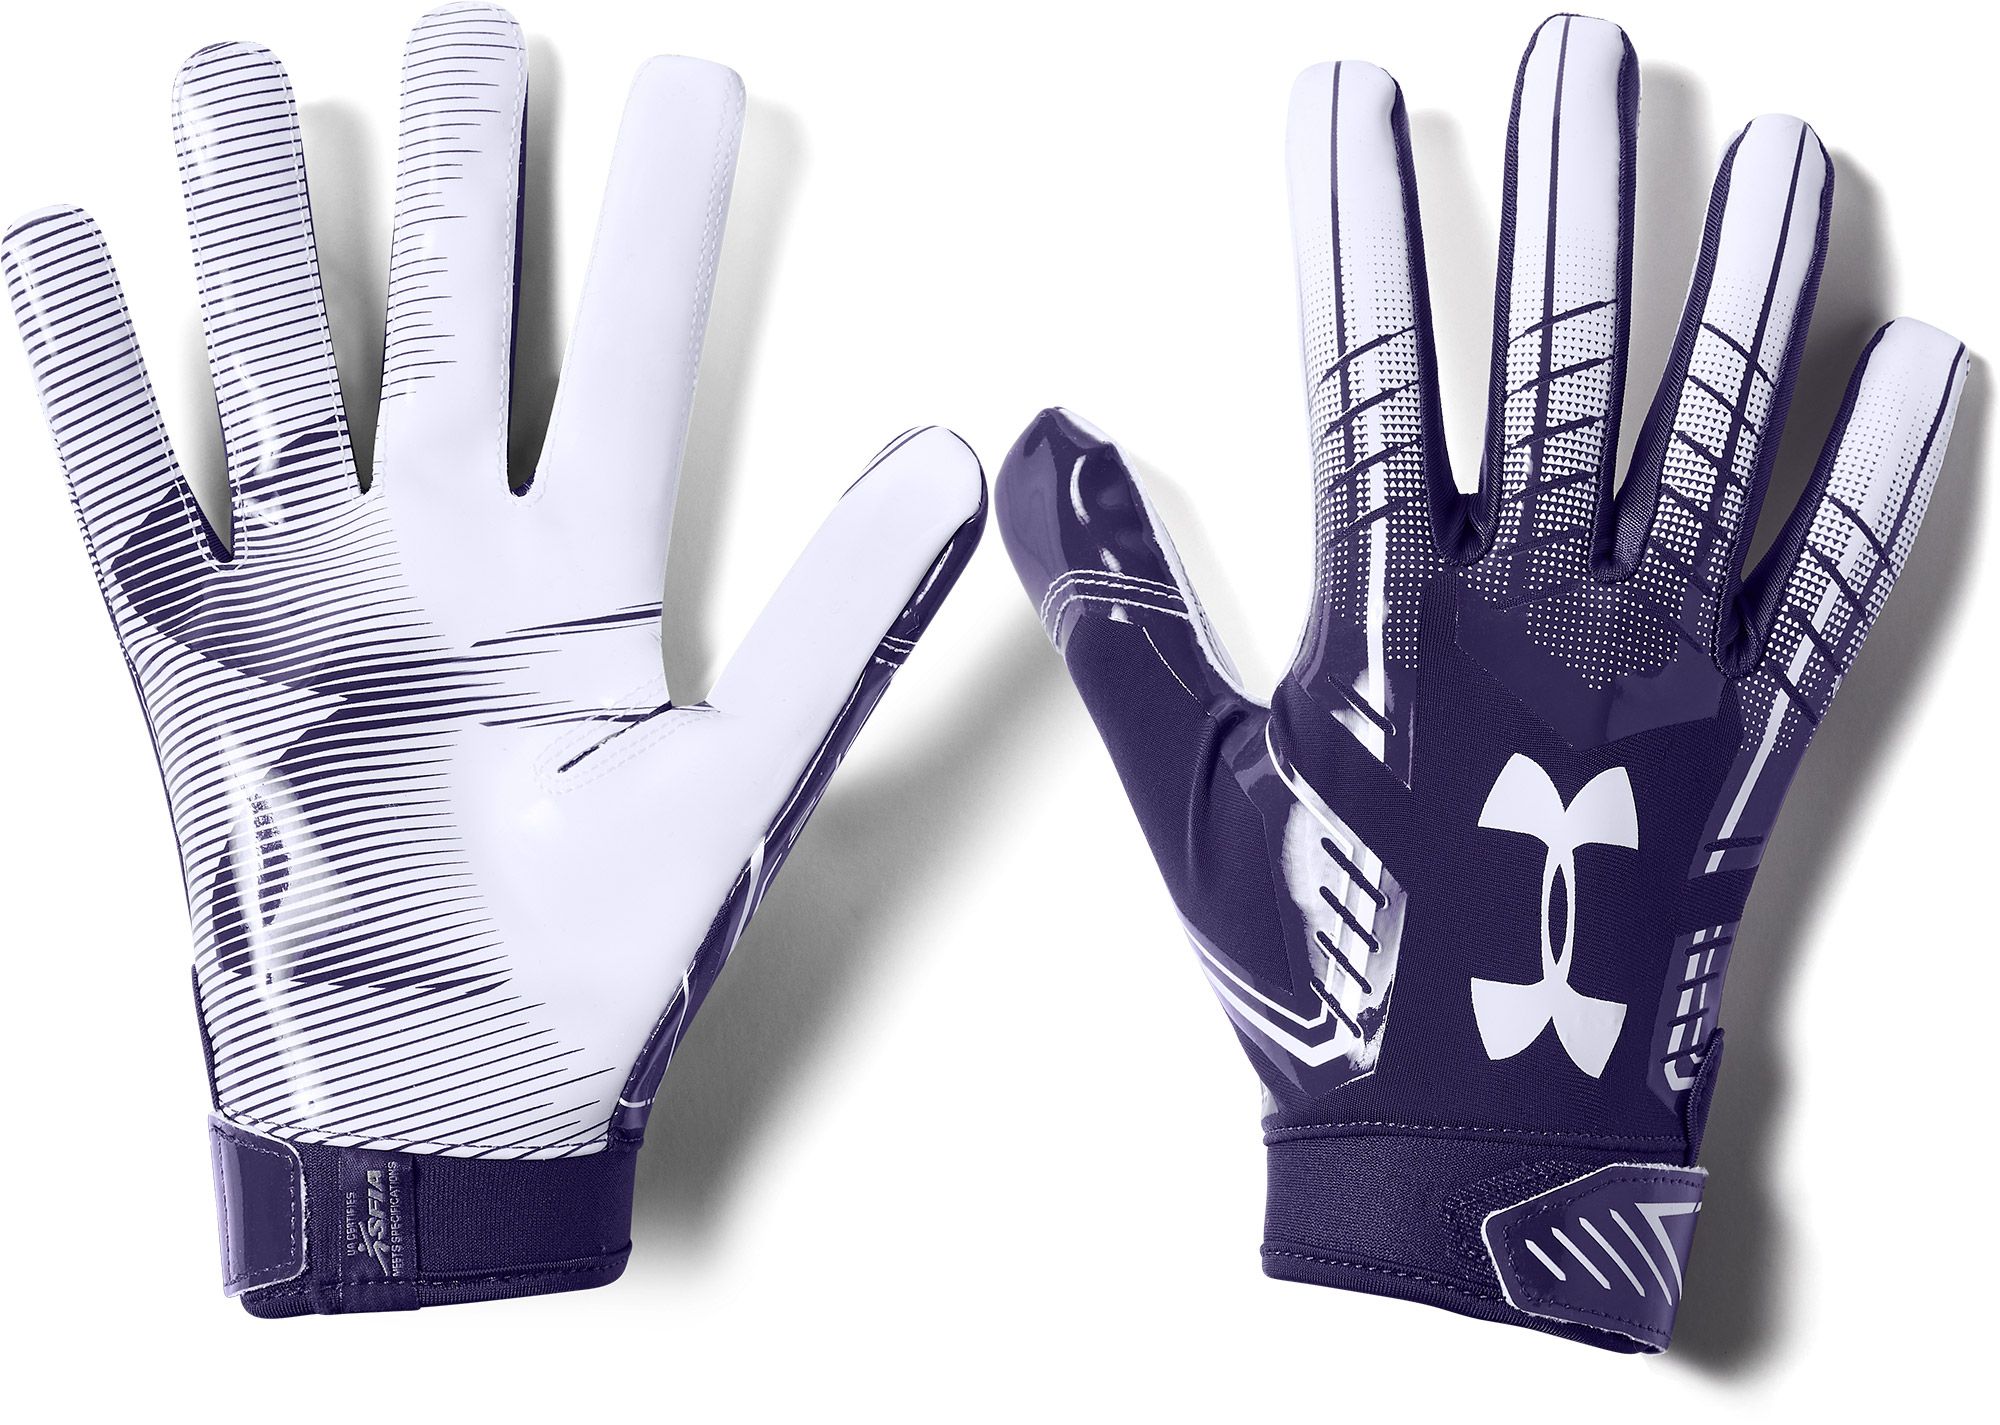 Under Armour UA F6 Limited Edition Football Gloves Men's Size L Always Open Blue 